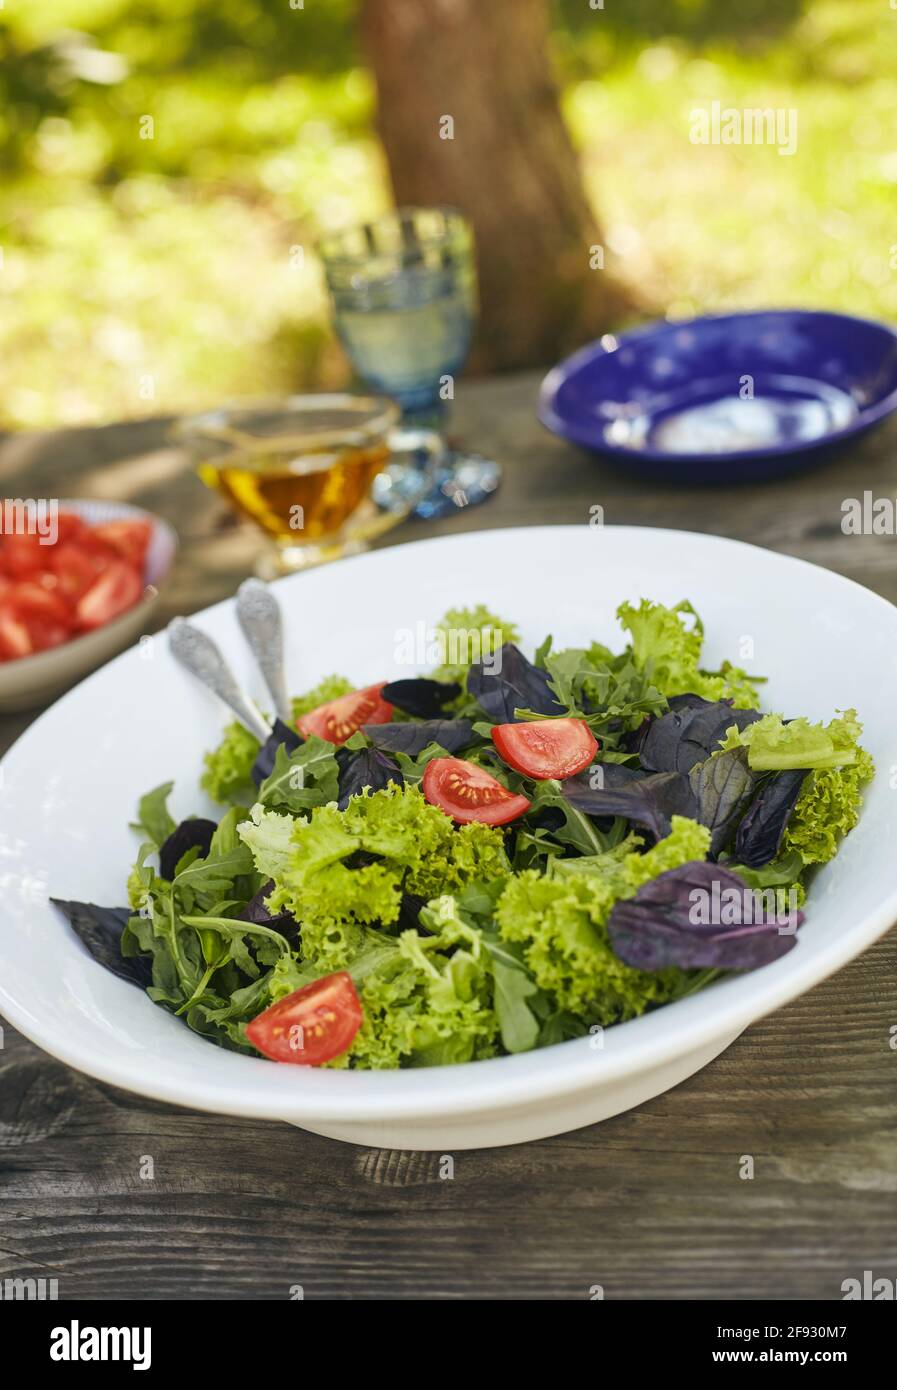 Fresh salad mix of arugula leaves, basil, lambs lettuce and tomatoes. Salad bowl, healthy food. Composition in a white plate on an old wooden table Stock Photo